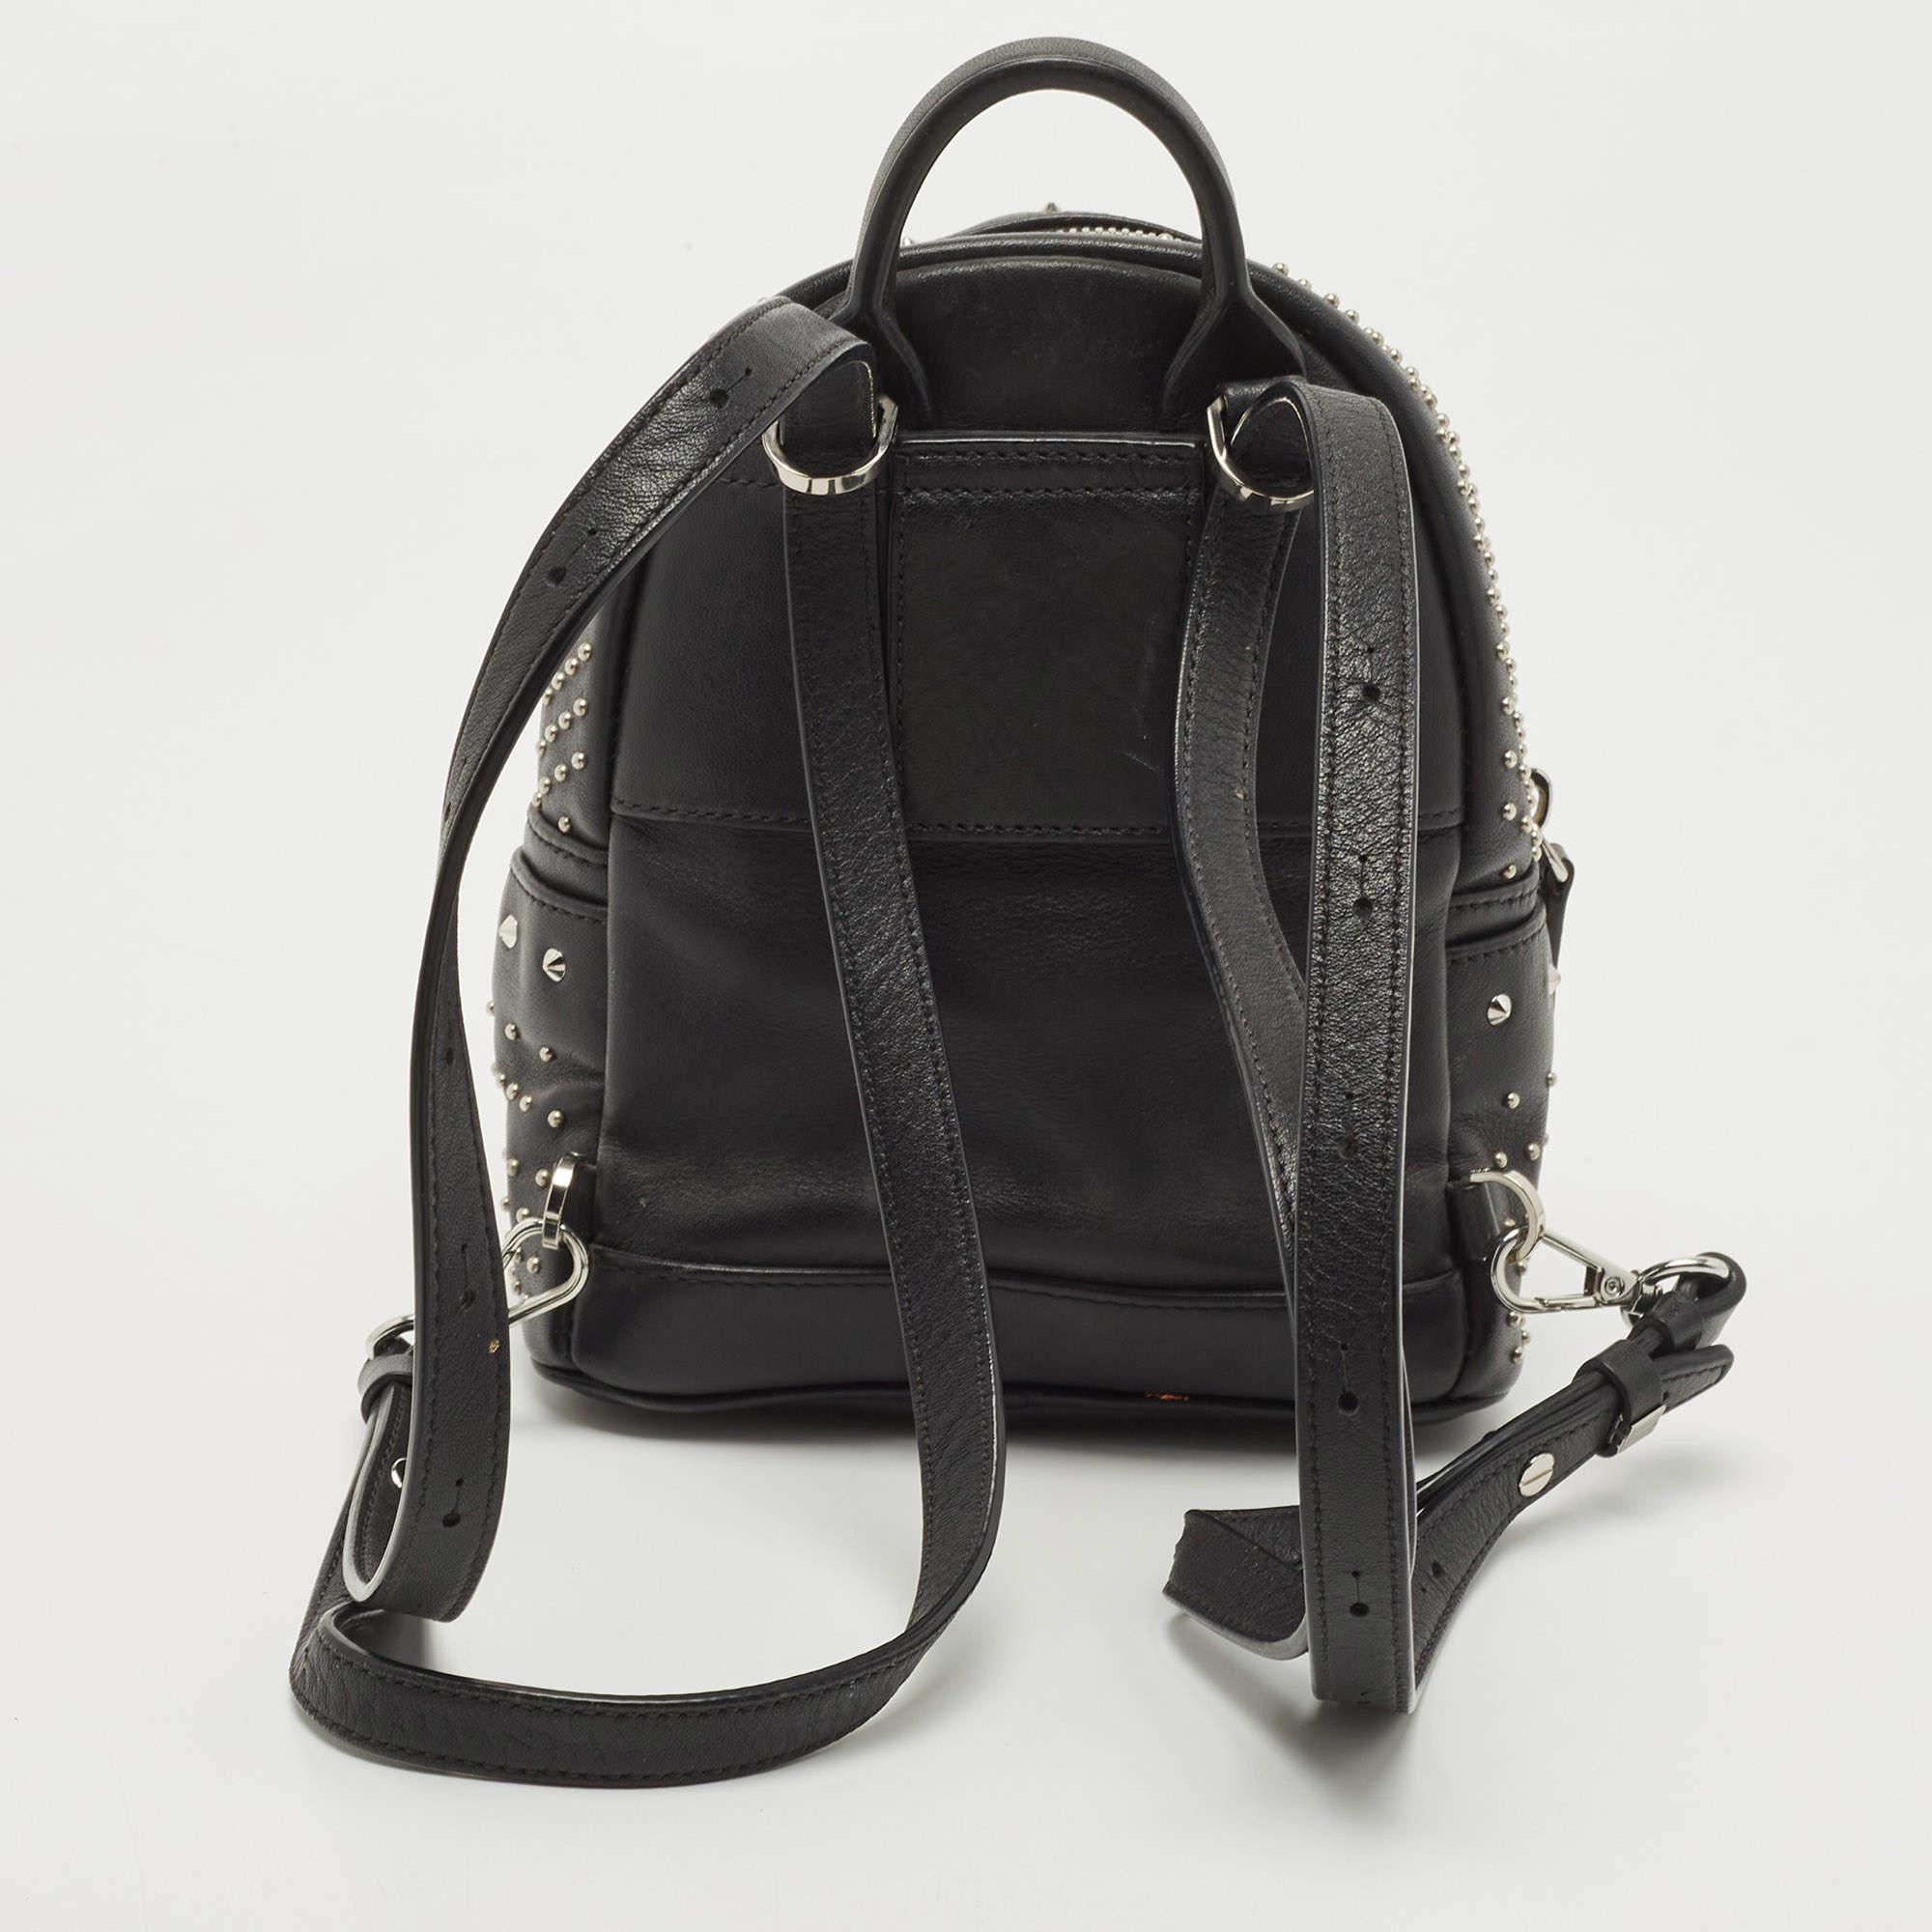 This MCM Stark-Bebe Boo backpack will come in handy for daily use or as a style statement. It is crafted from black leather and designed with silver-tone studs. It features a front zip pocket and a slip pocket on the sides.

